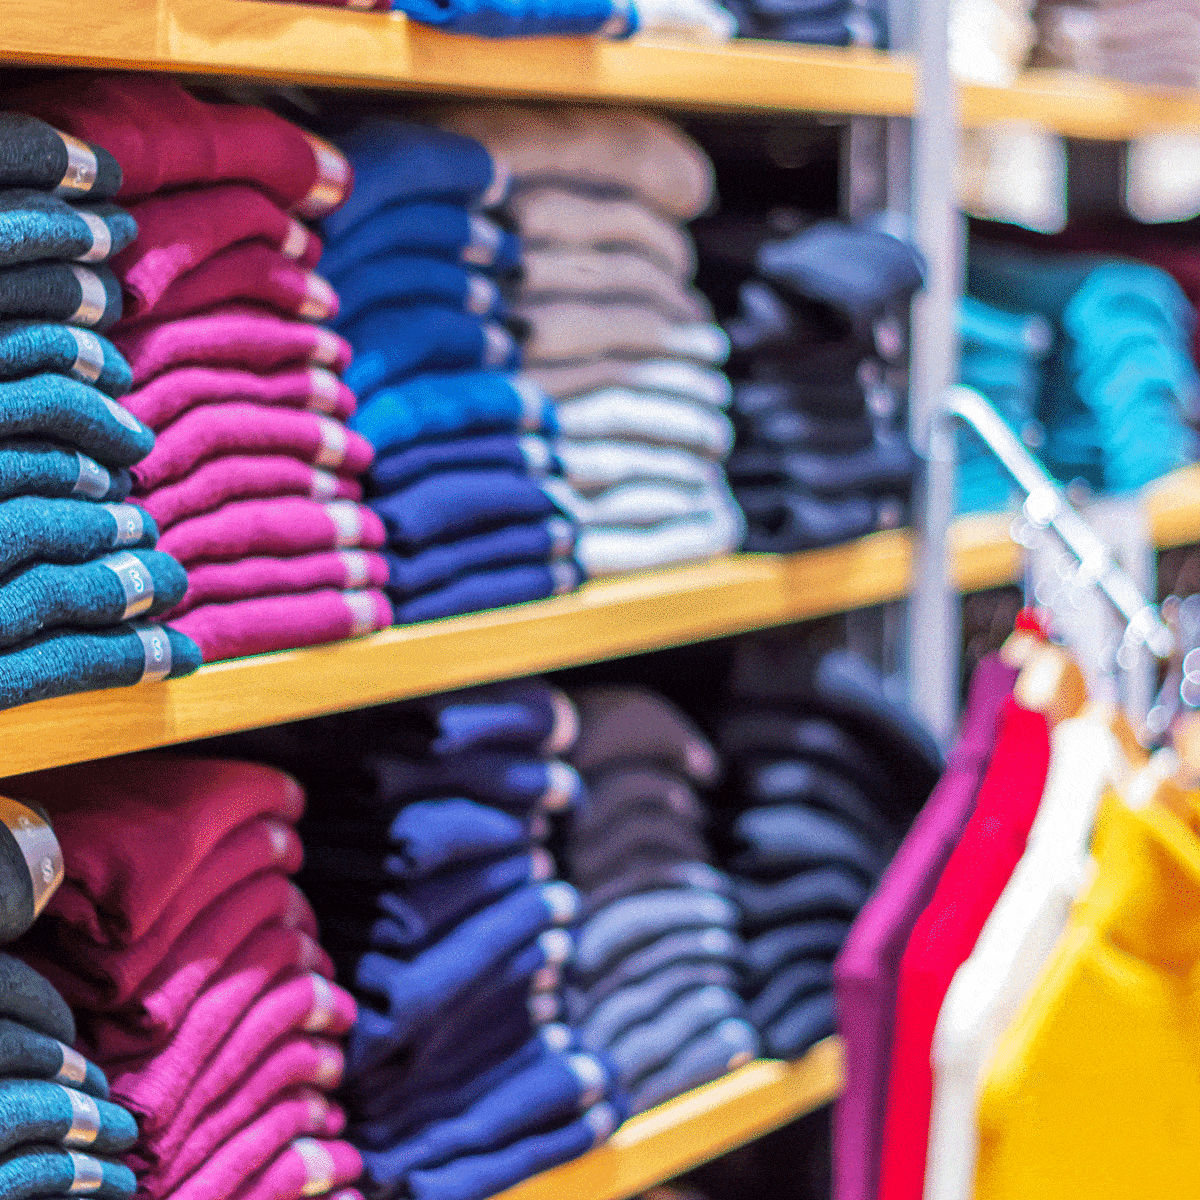 Colourful items of clothing folded on shelves in a clothing store